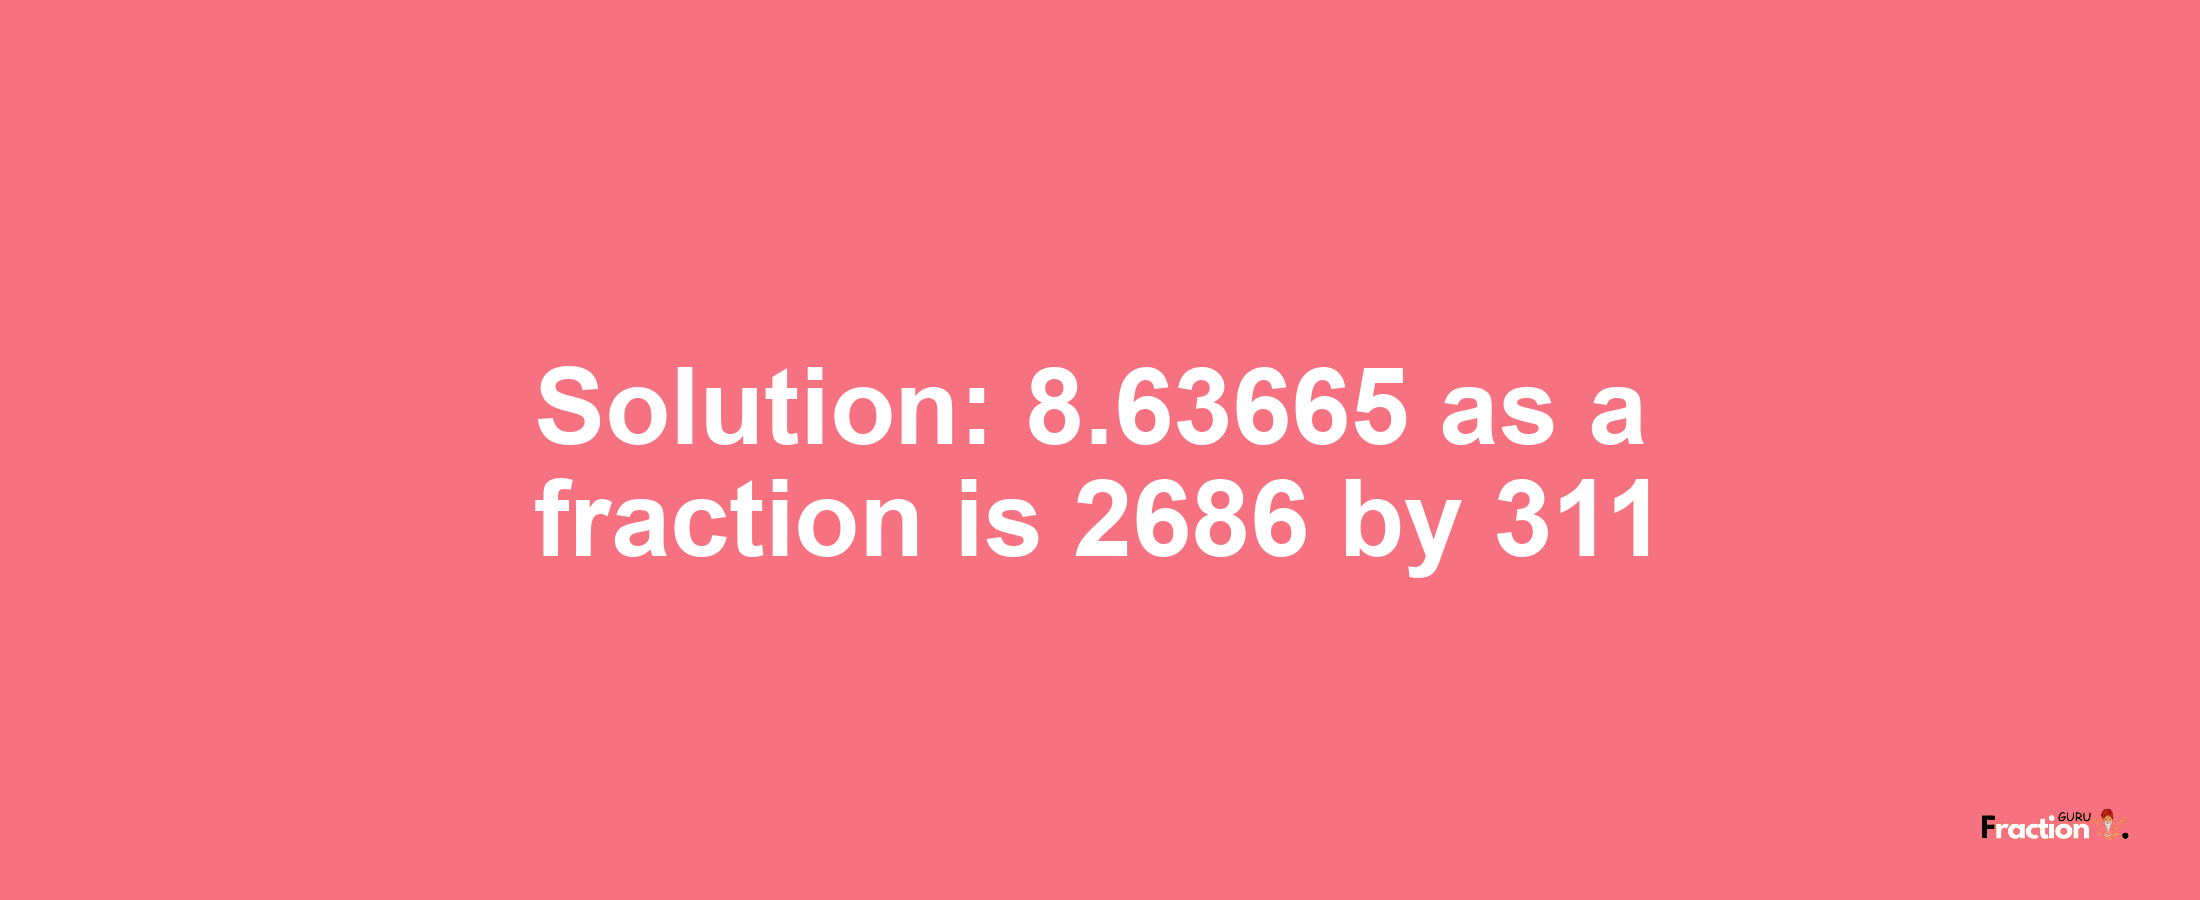 Solution:8.63665 as a fraction is 2686/311